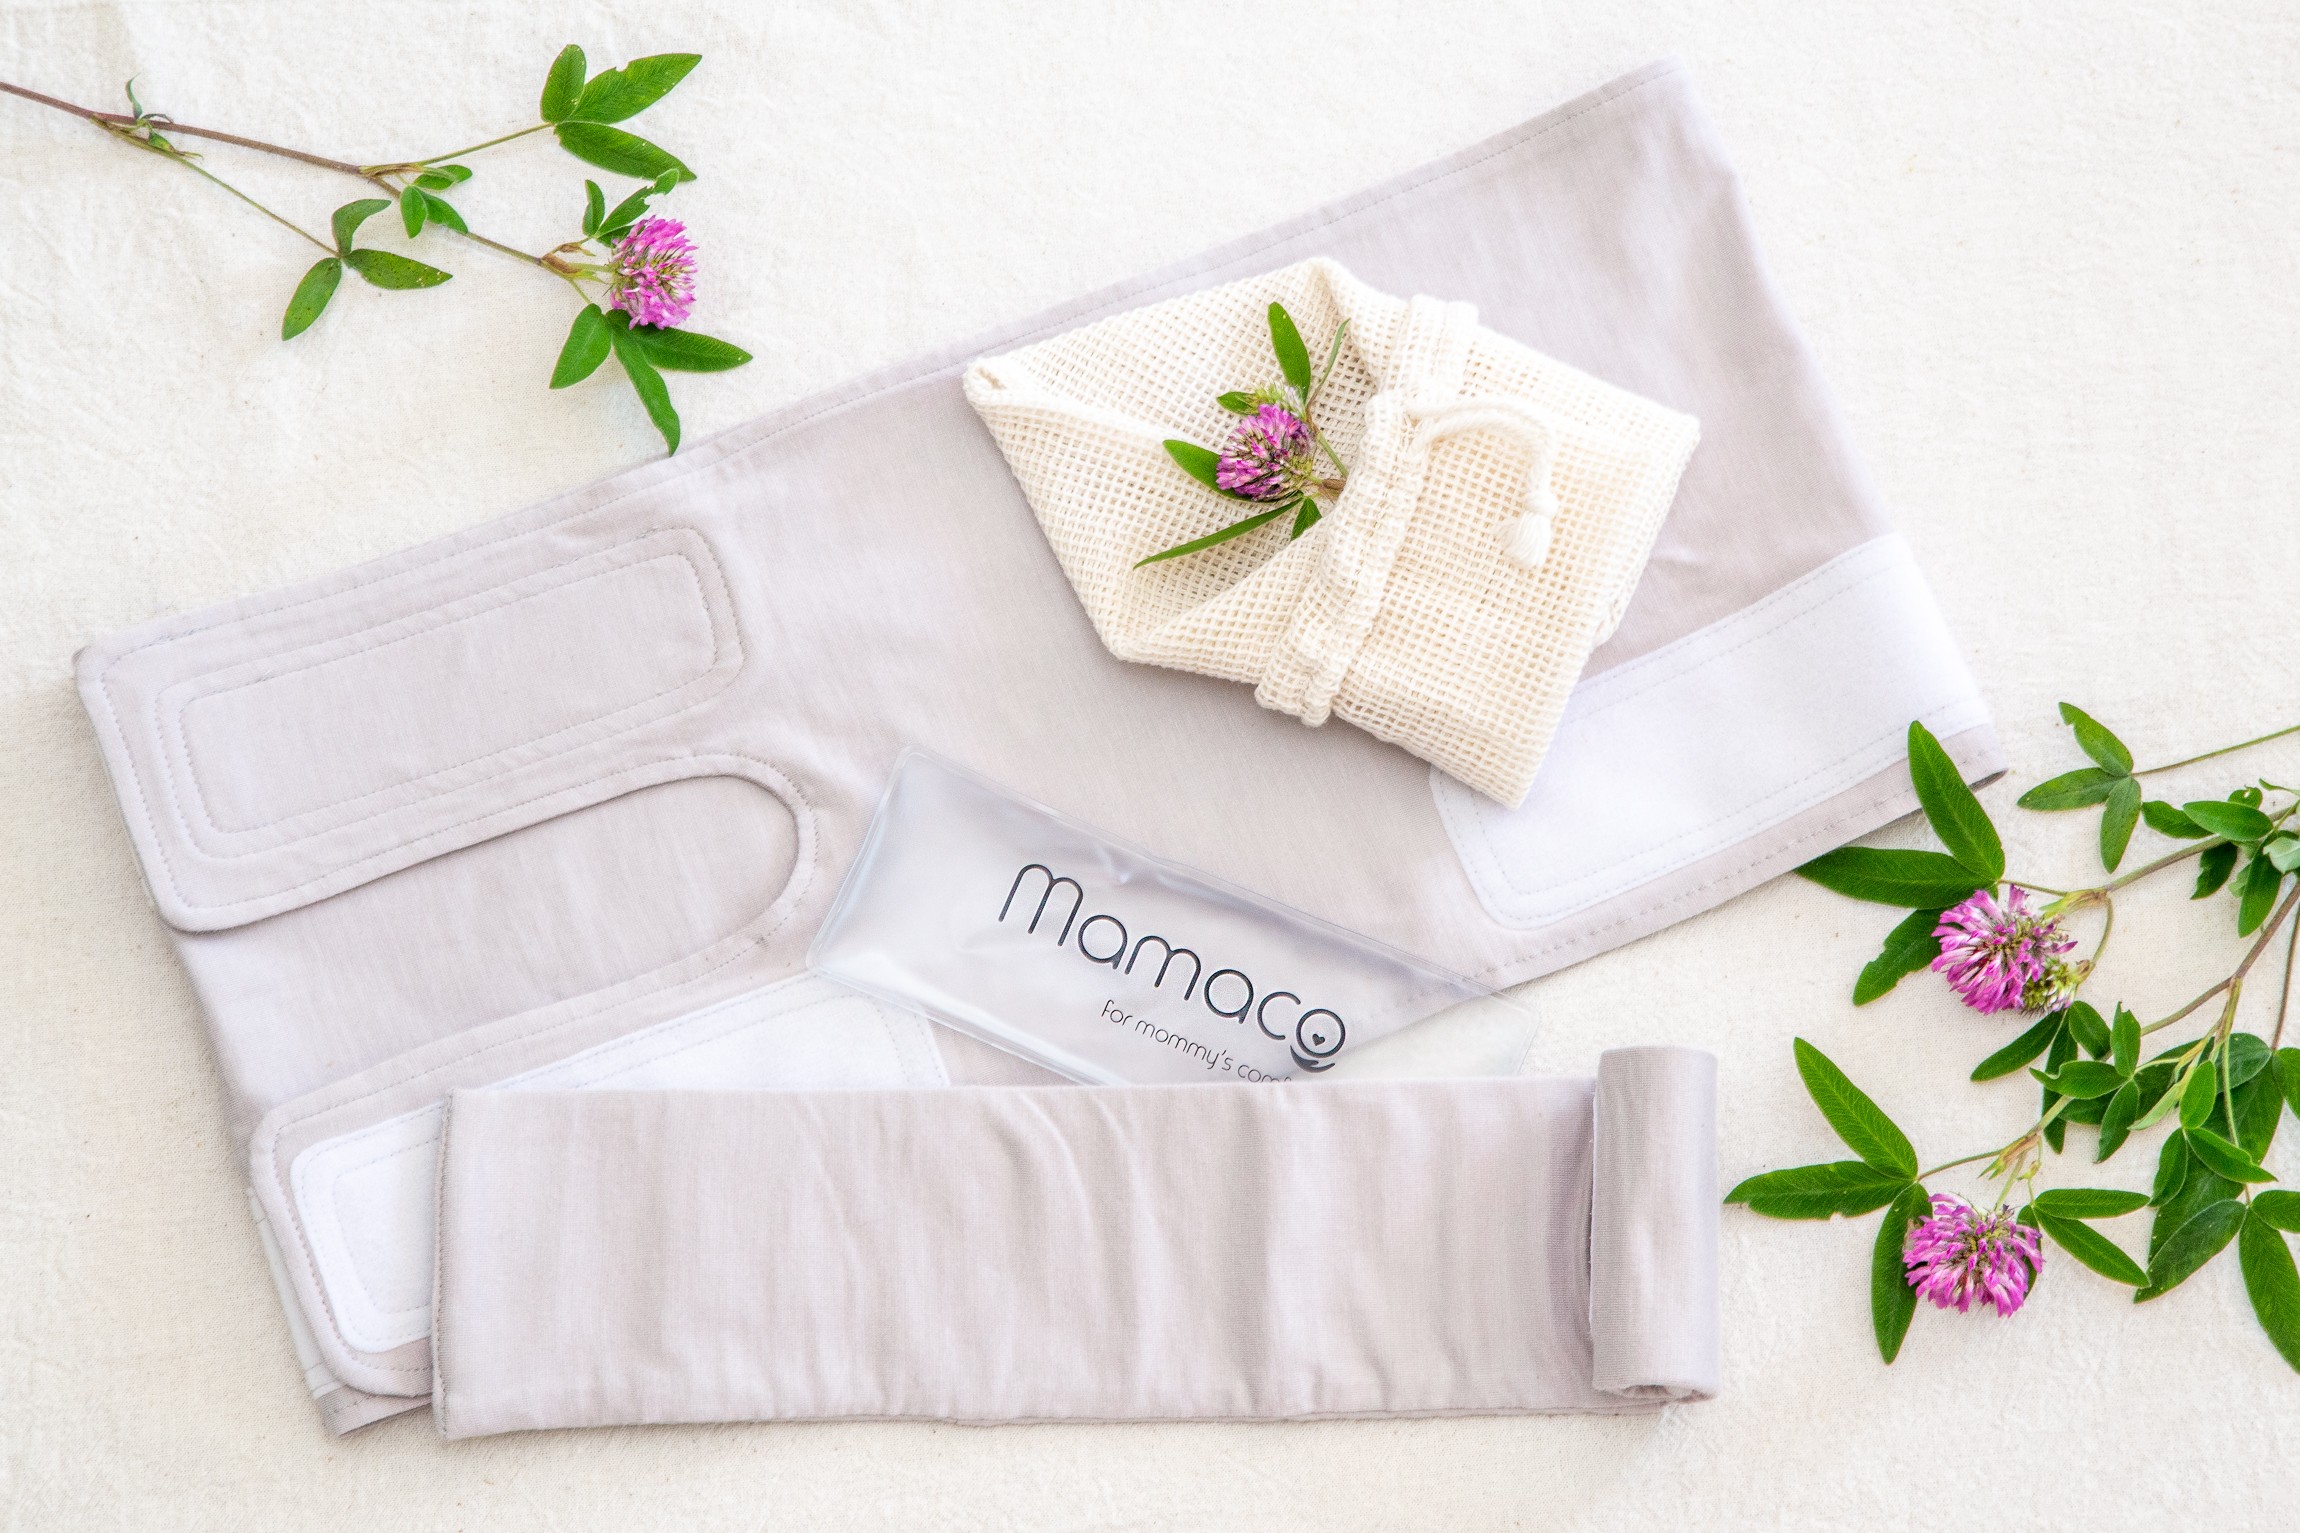 MAMACO Soft bandage with a gel pouch